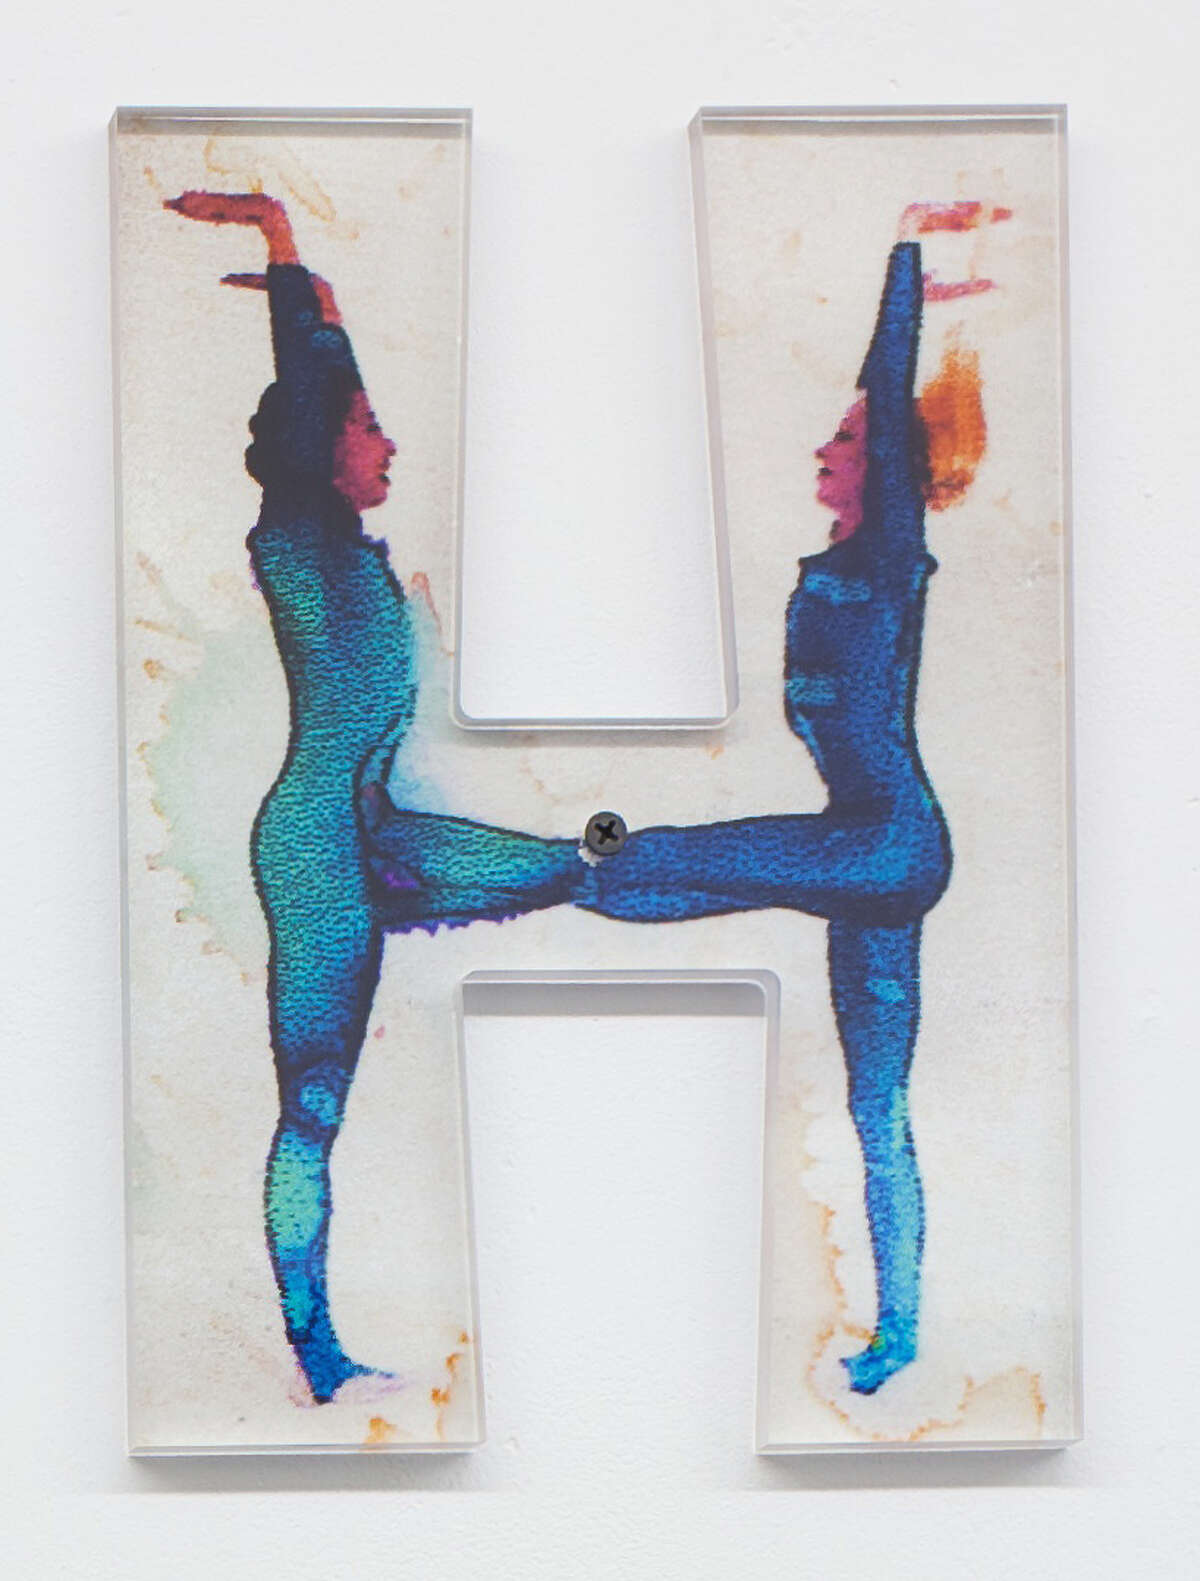 Sarah Greenberger Rafferty, "H Prop," 2012, Direct substrate printing on Plexiglass, 9 ¼ x 7 x ½ inches. Courtesy LABspace.